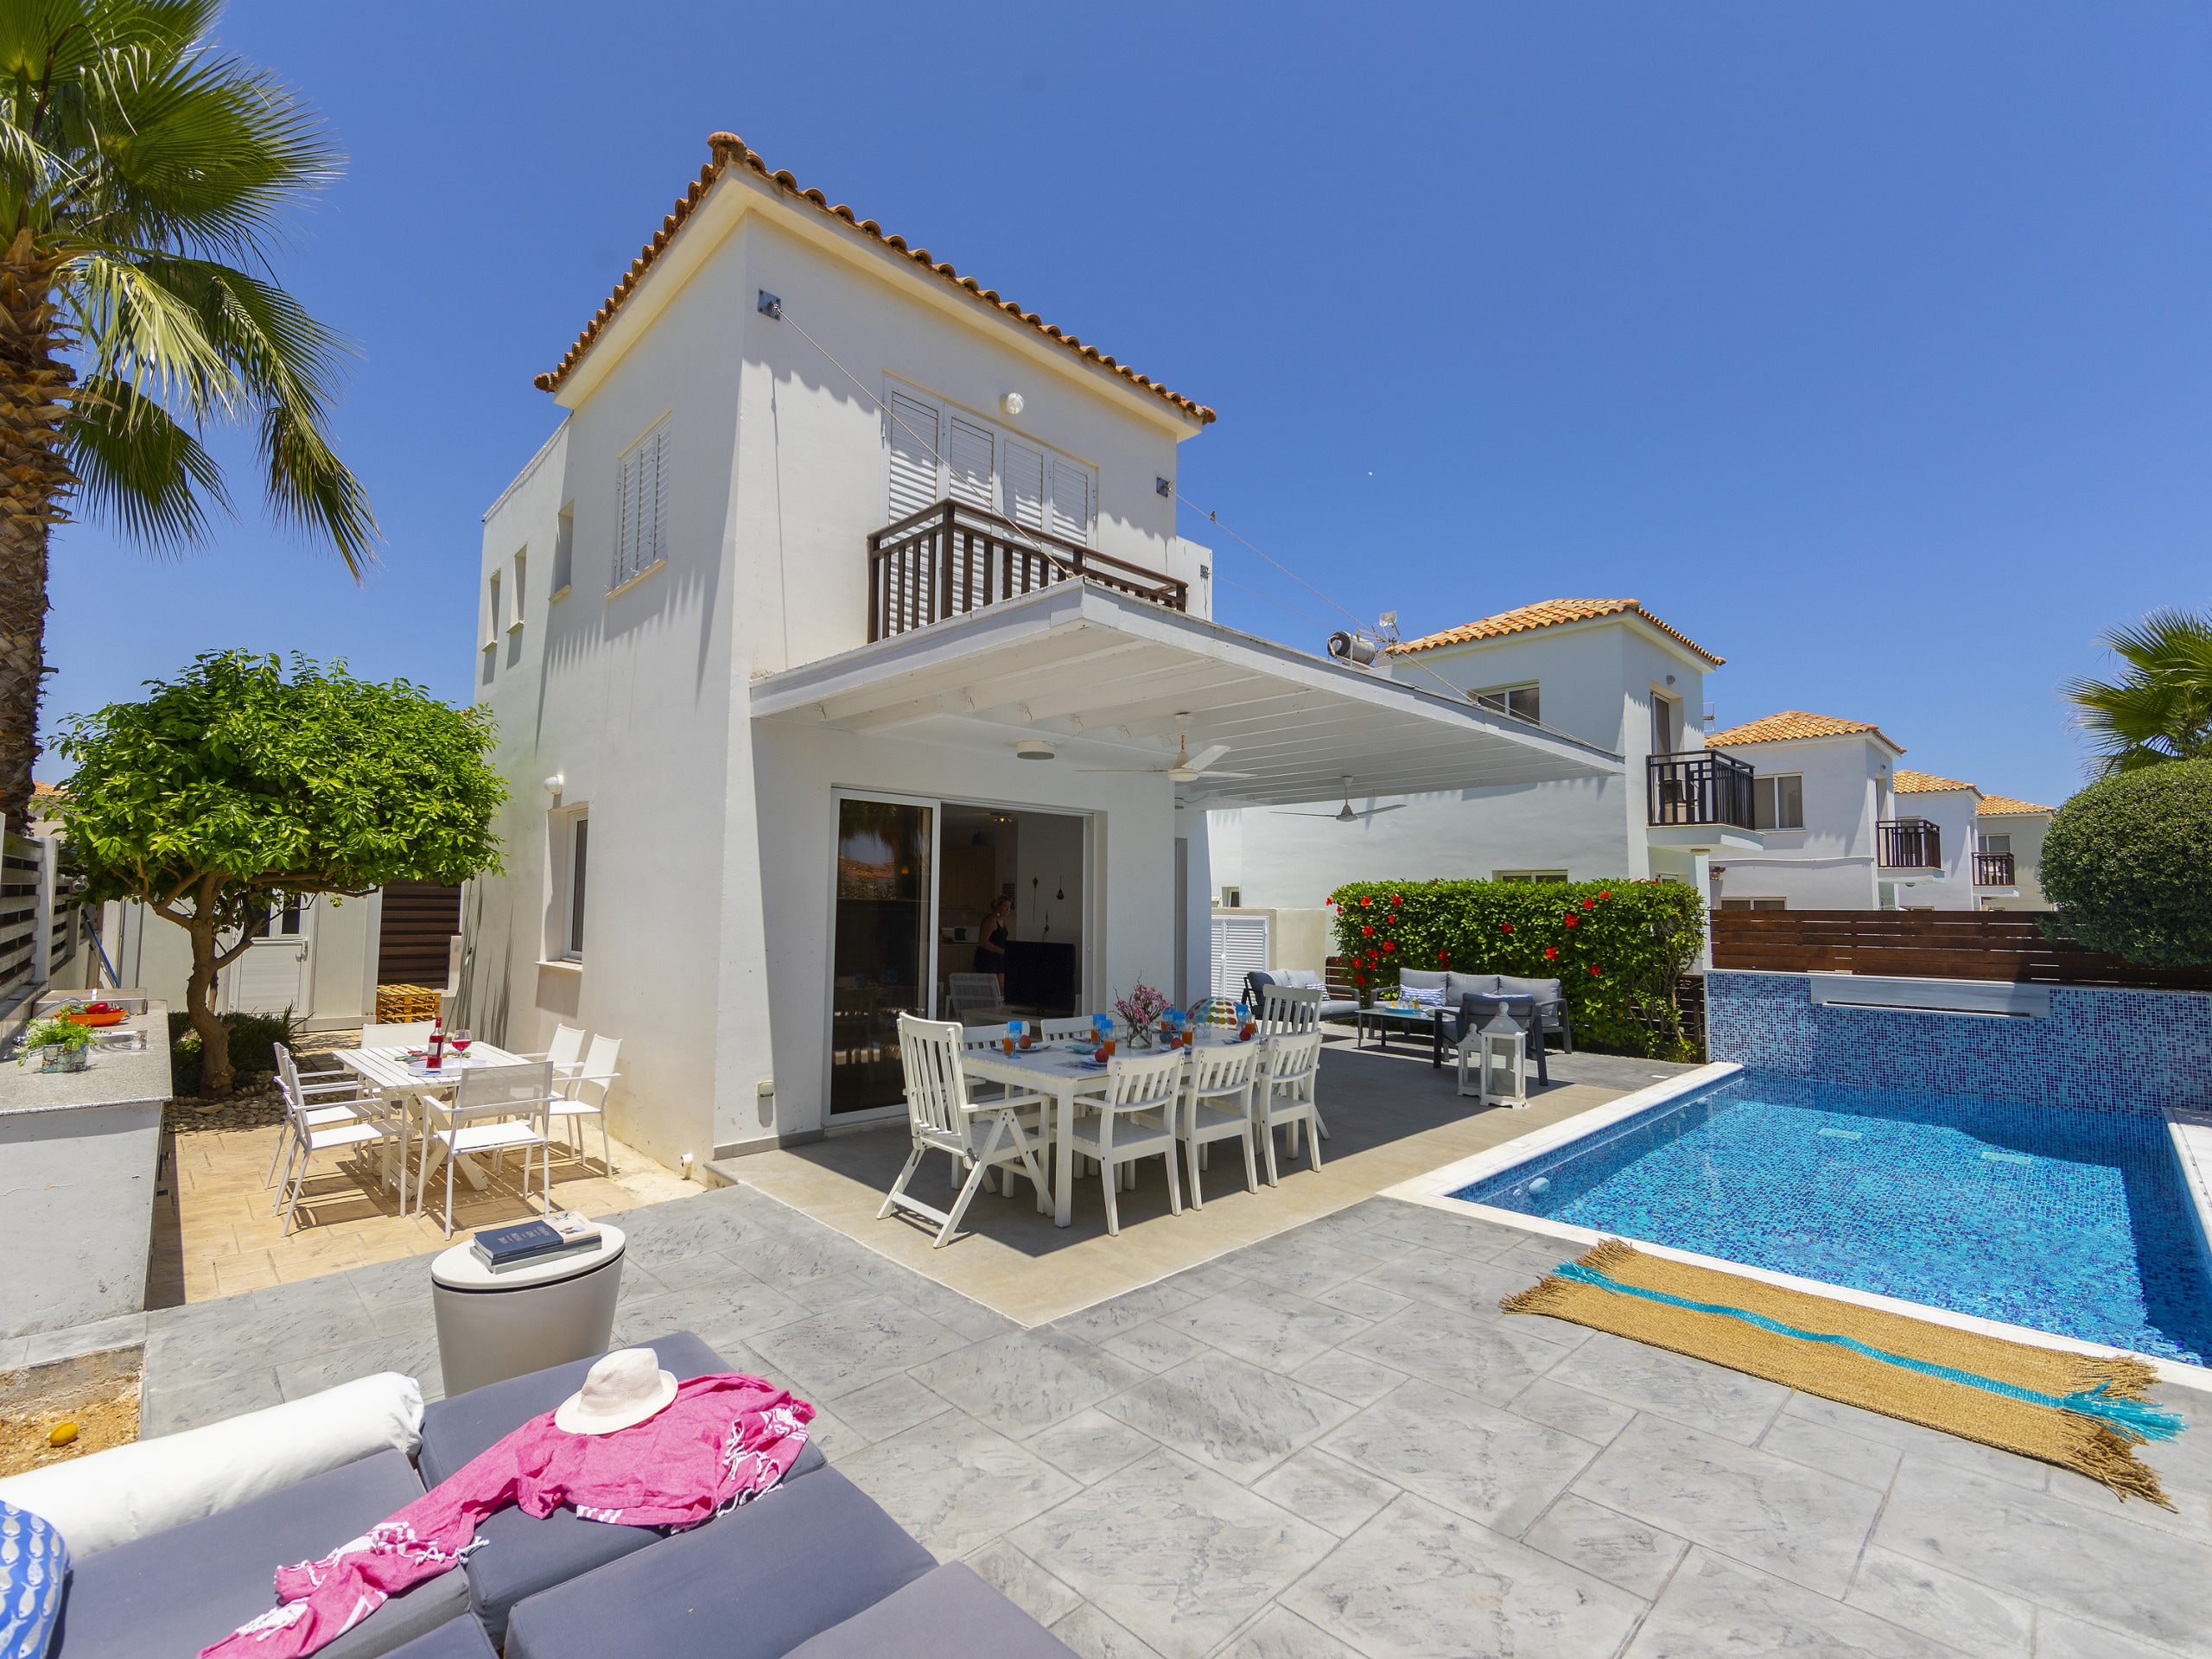 Property Image 1 - Charming Country Villa near the Beach with Nice Pool